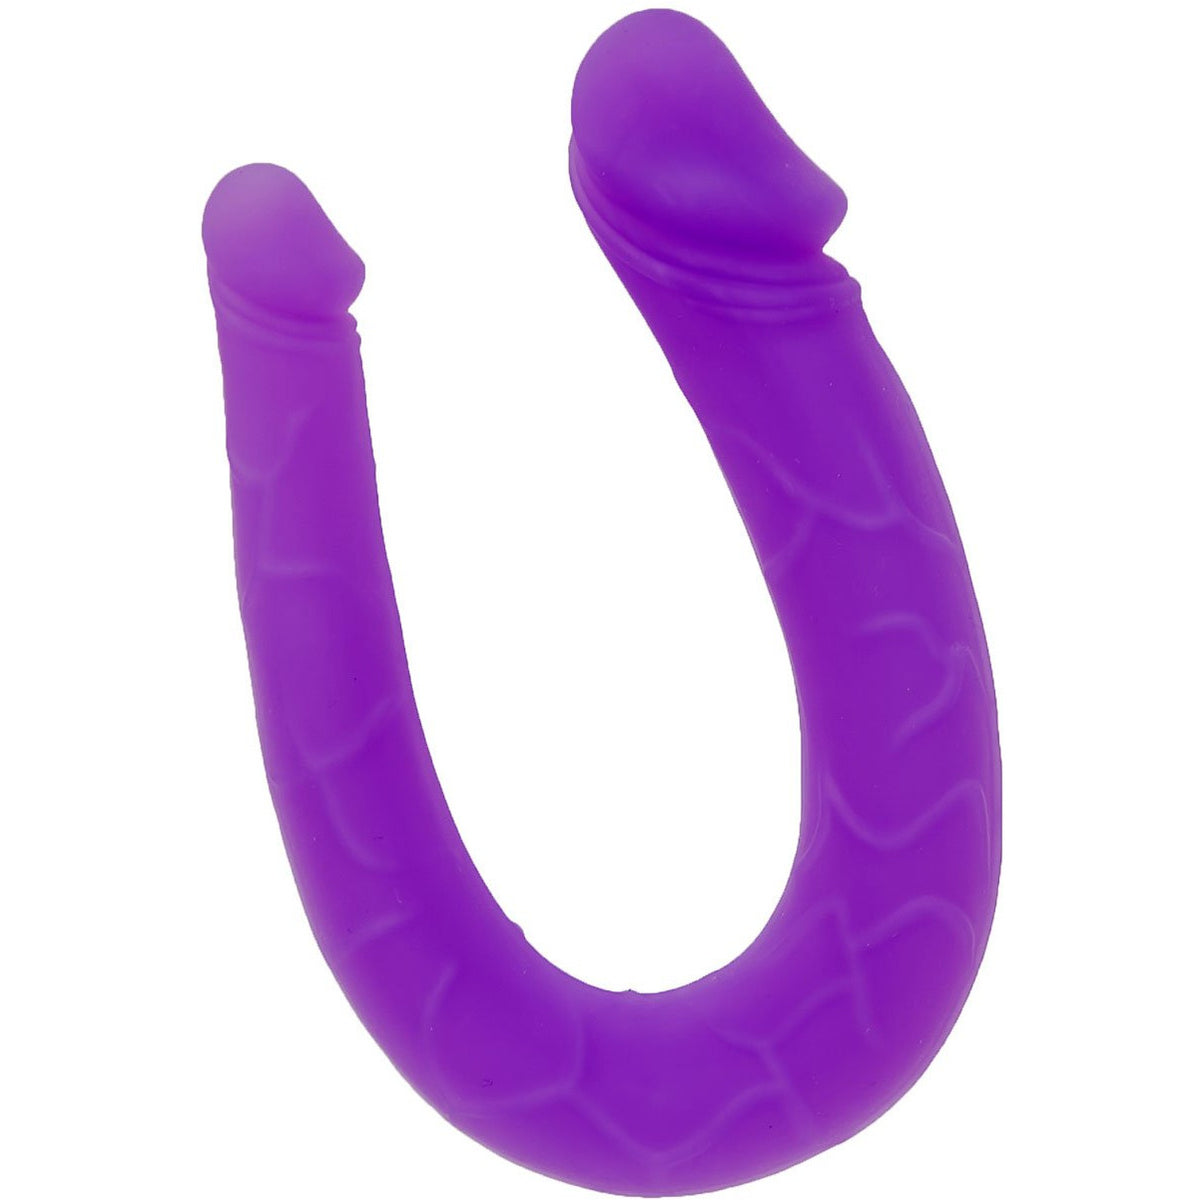 Seven Creations Silicone Double Mini Double Penetration Dong - Purple